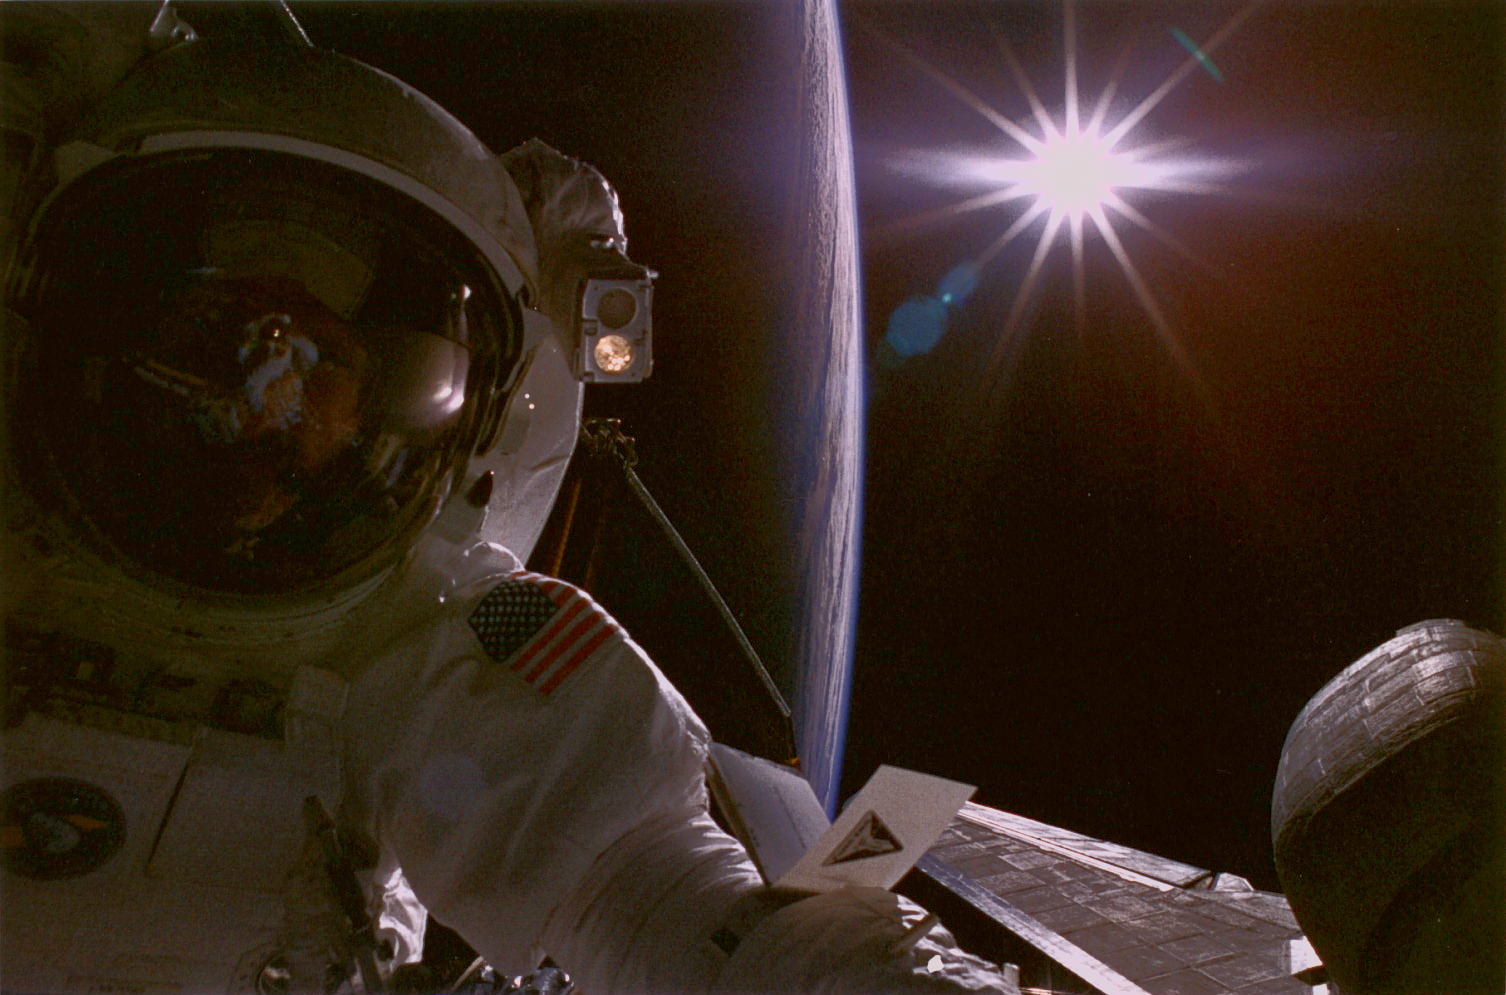 An astronaut with the earth and sun in the background.